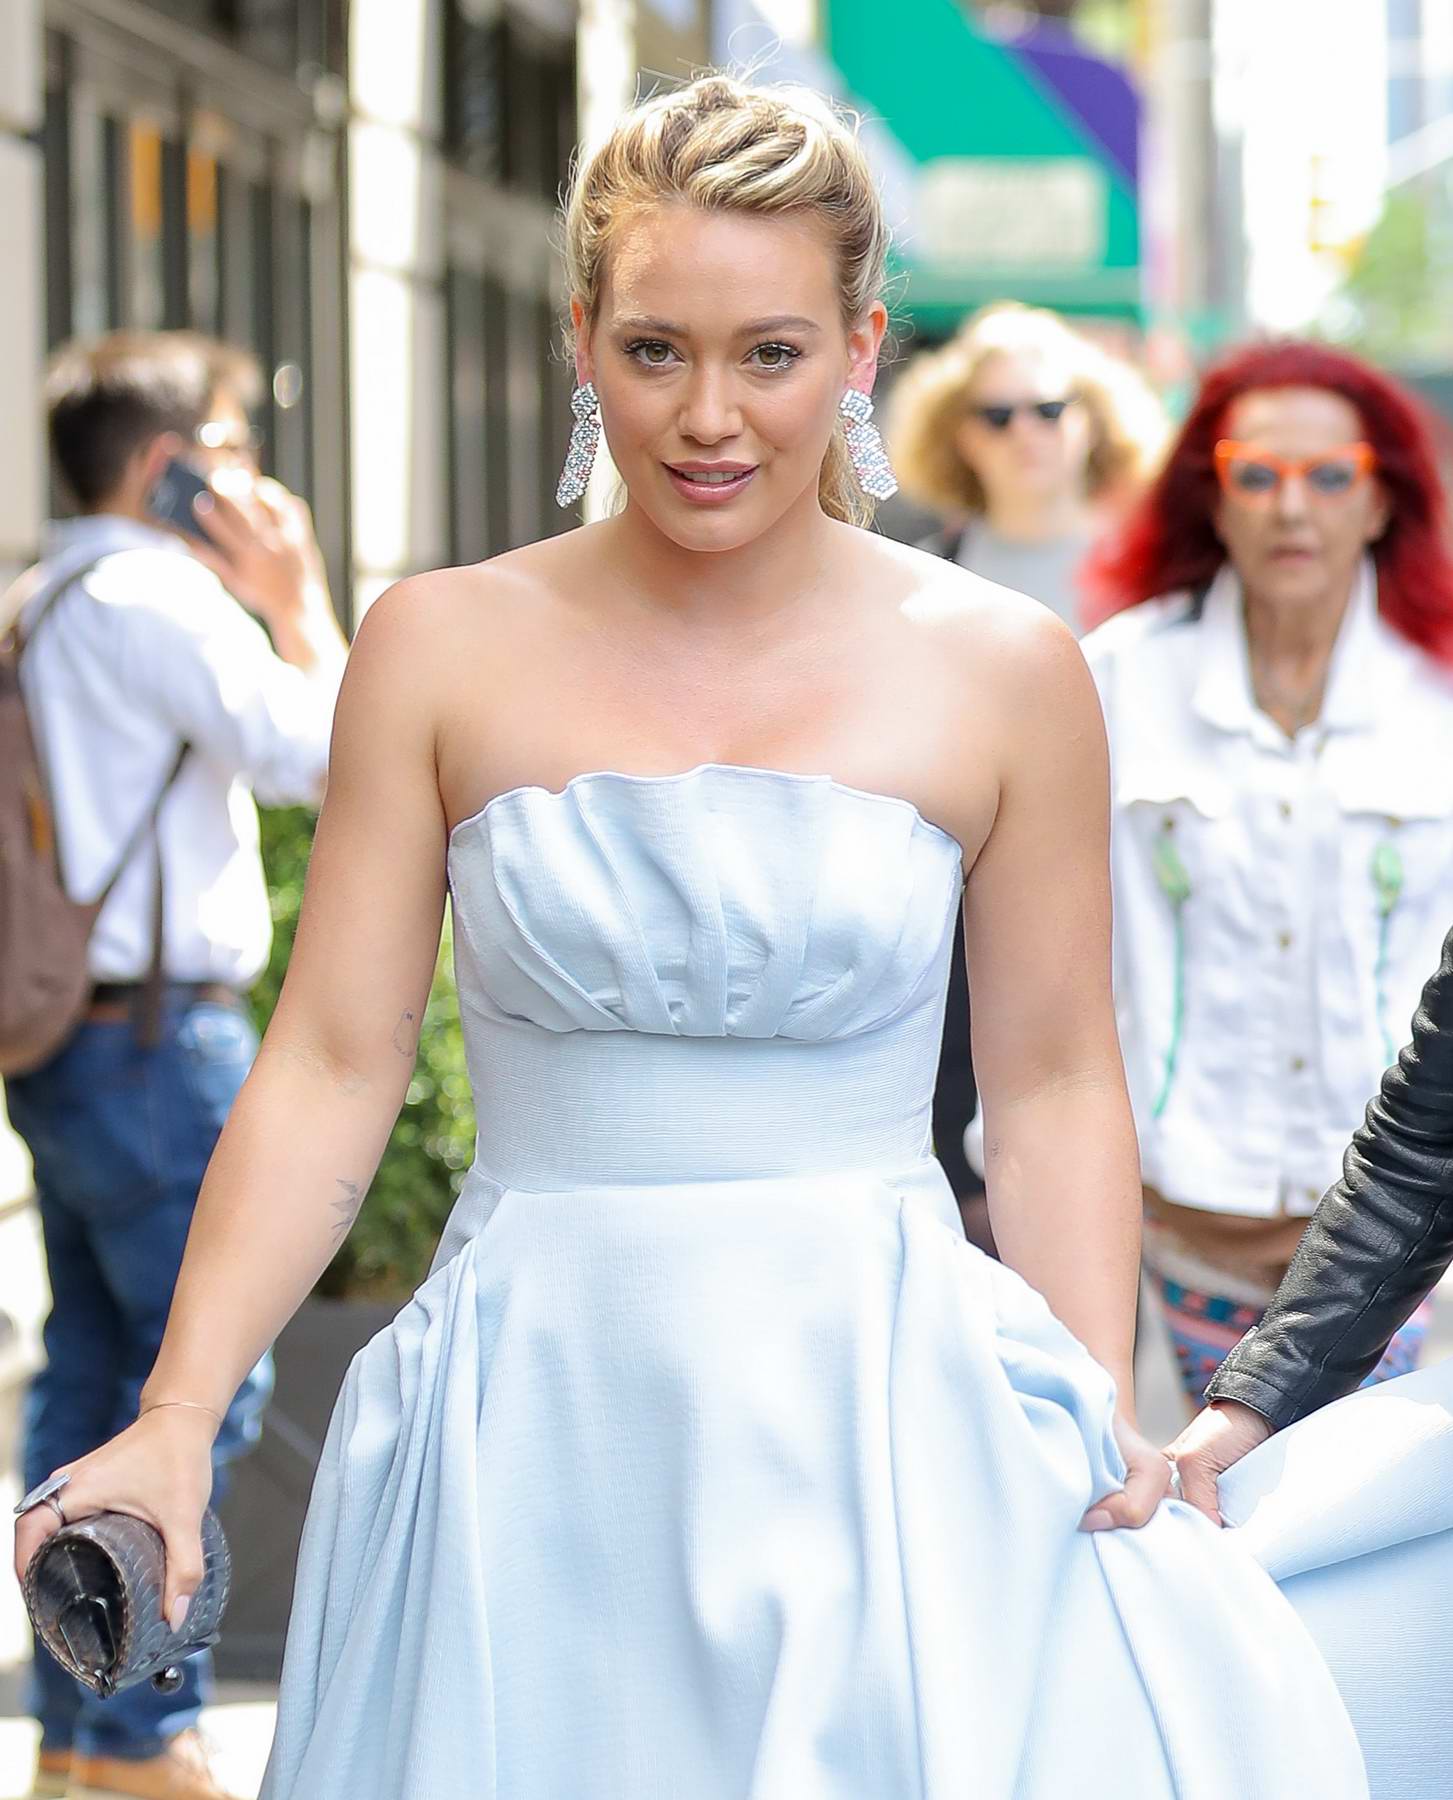 Hilary Duff in a Gala Dress filming for 